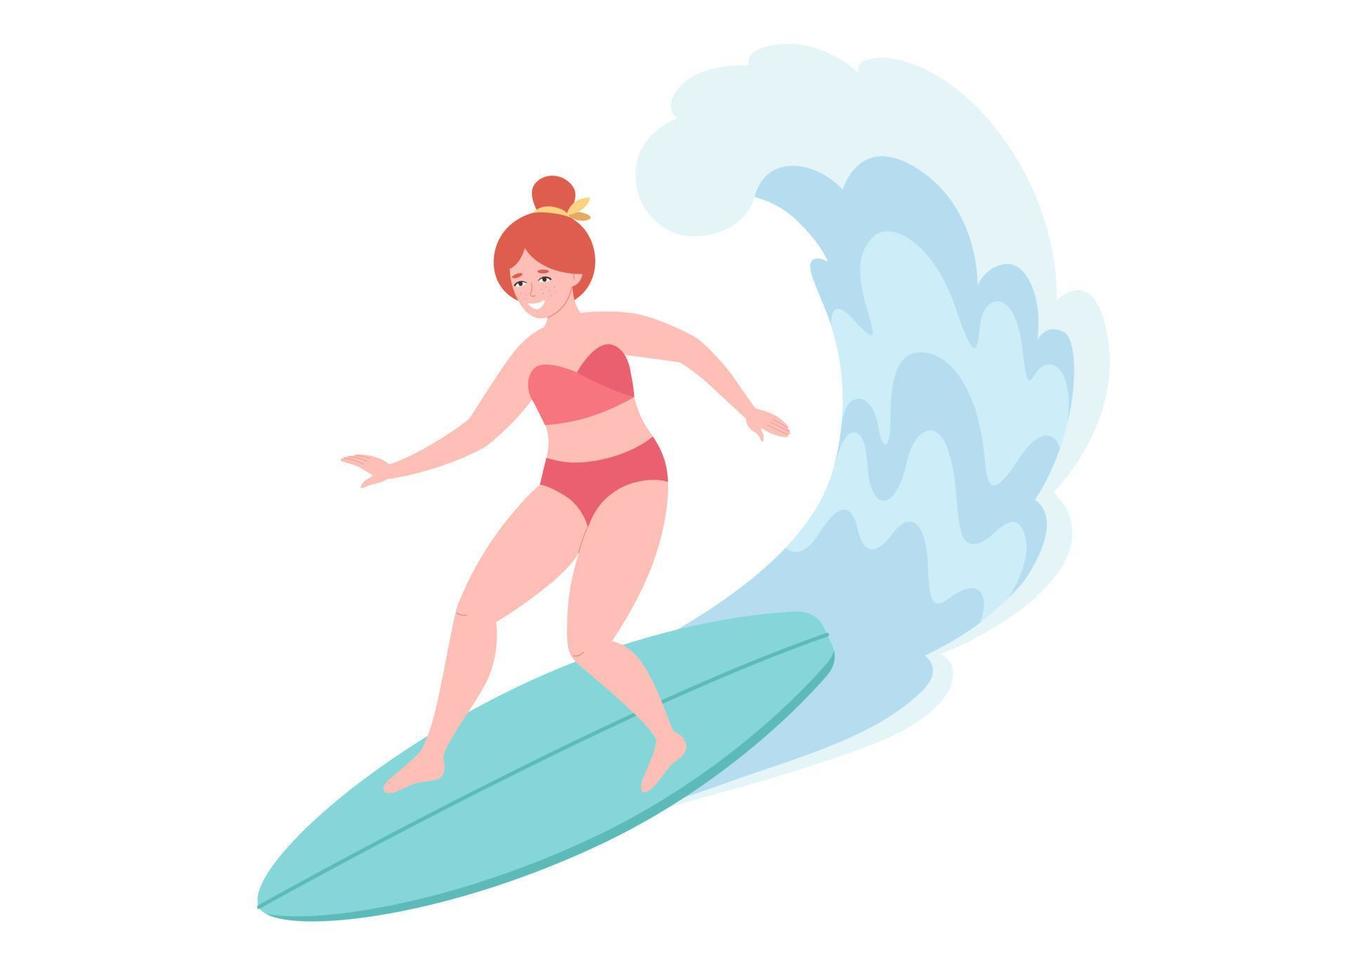 Woman surfing on surfboard and catching waves in ocean. Summer activity, summertime, surfing. Hello summer vector